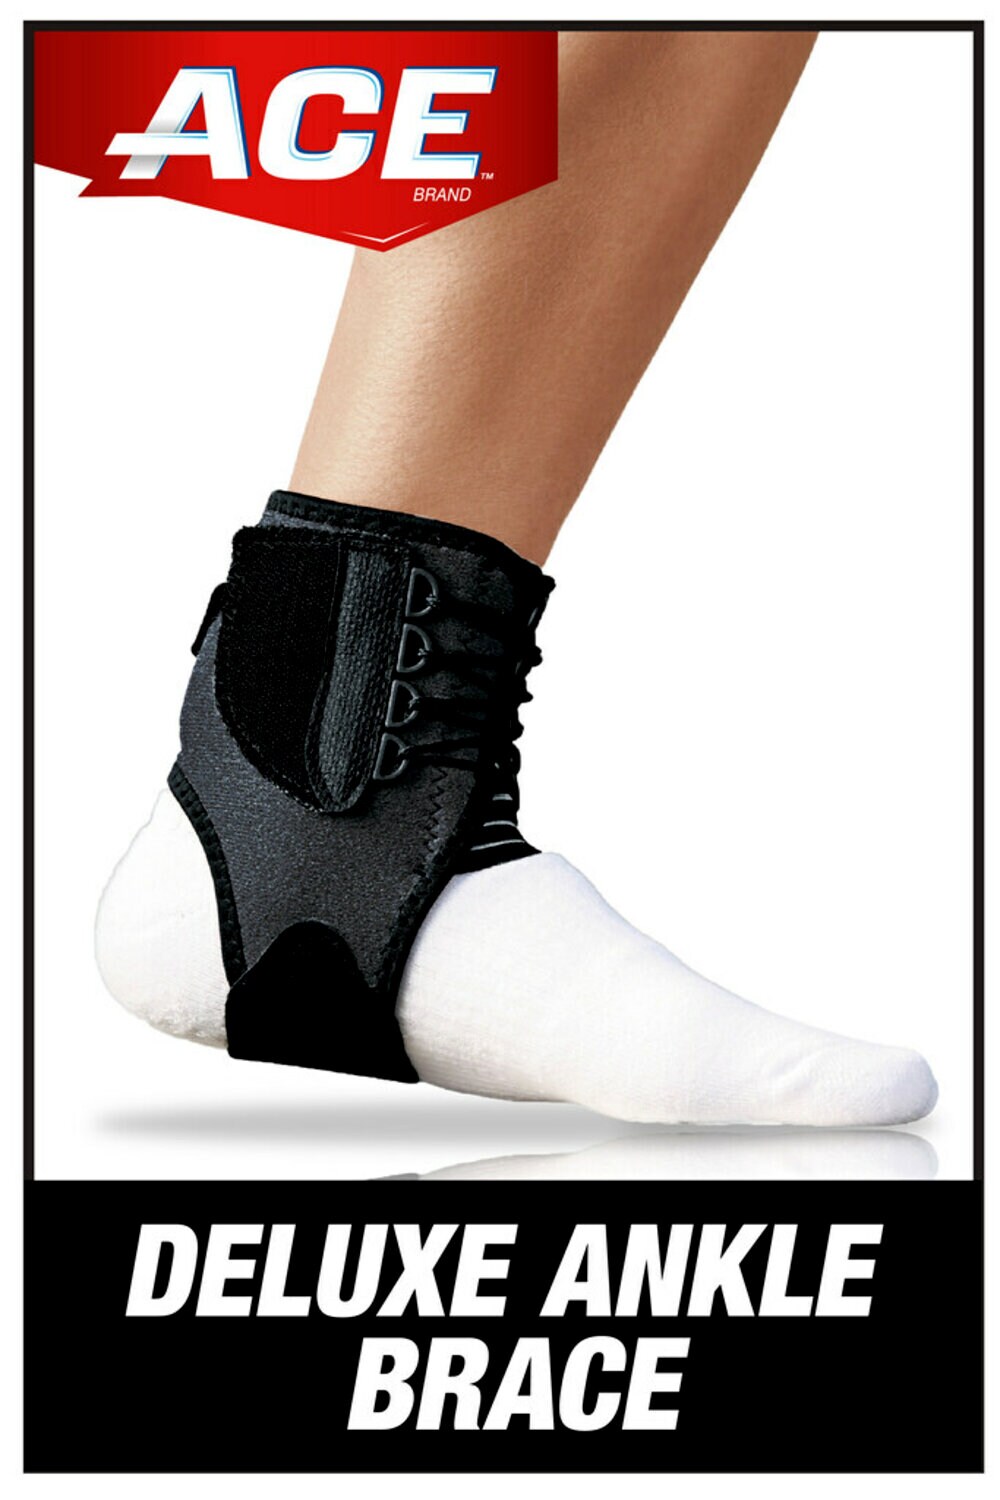 7100160543 - ACE Deluxe Ankle Brace 207736, One Size Adjustable